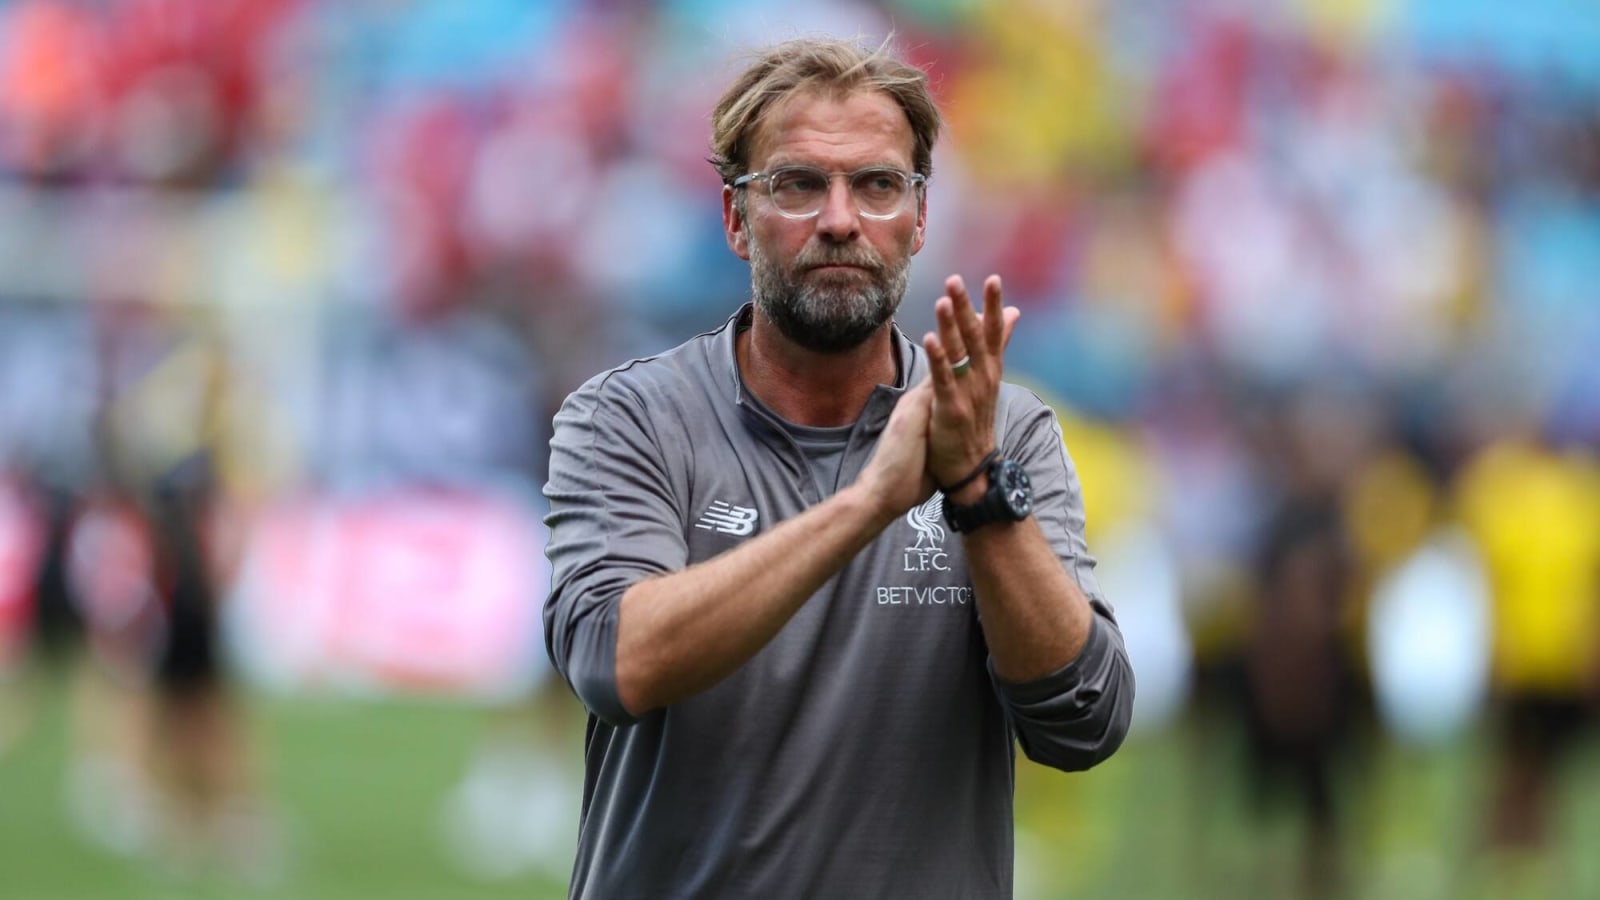 Watch: Jurgen Klopp hints that rarely-seen Liverpool player could feature v Wolves on Sunday